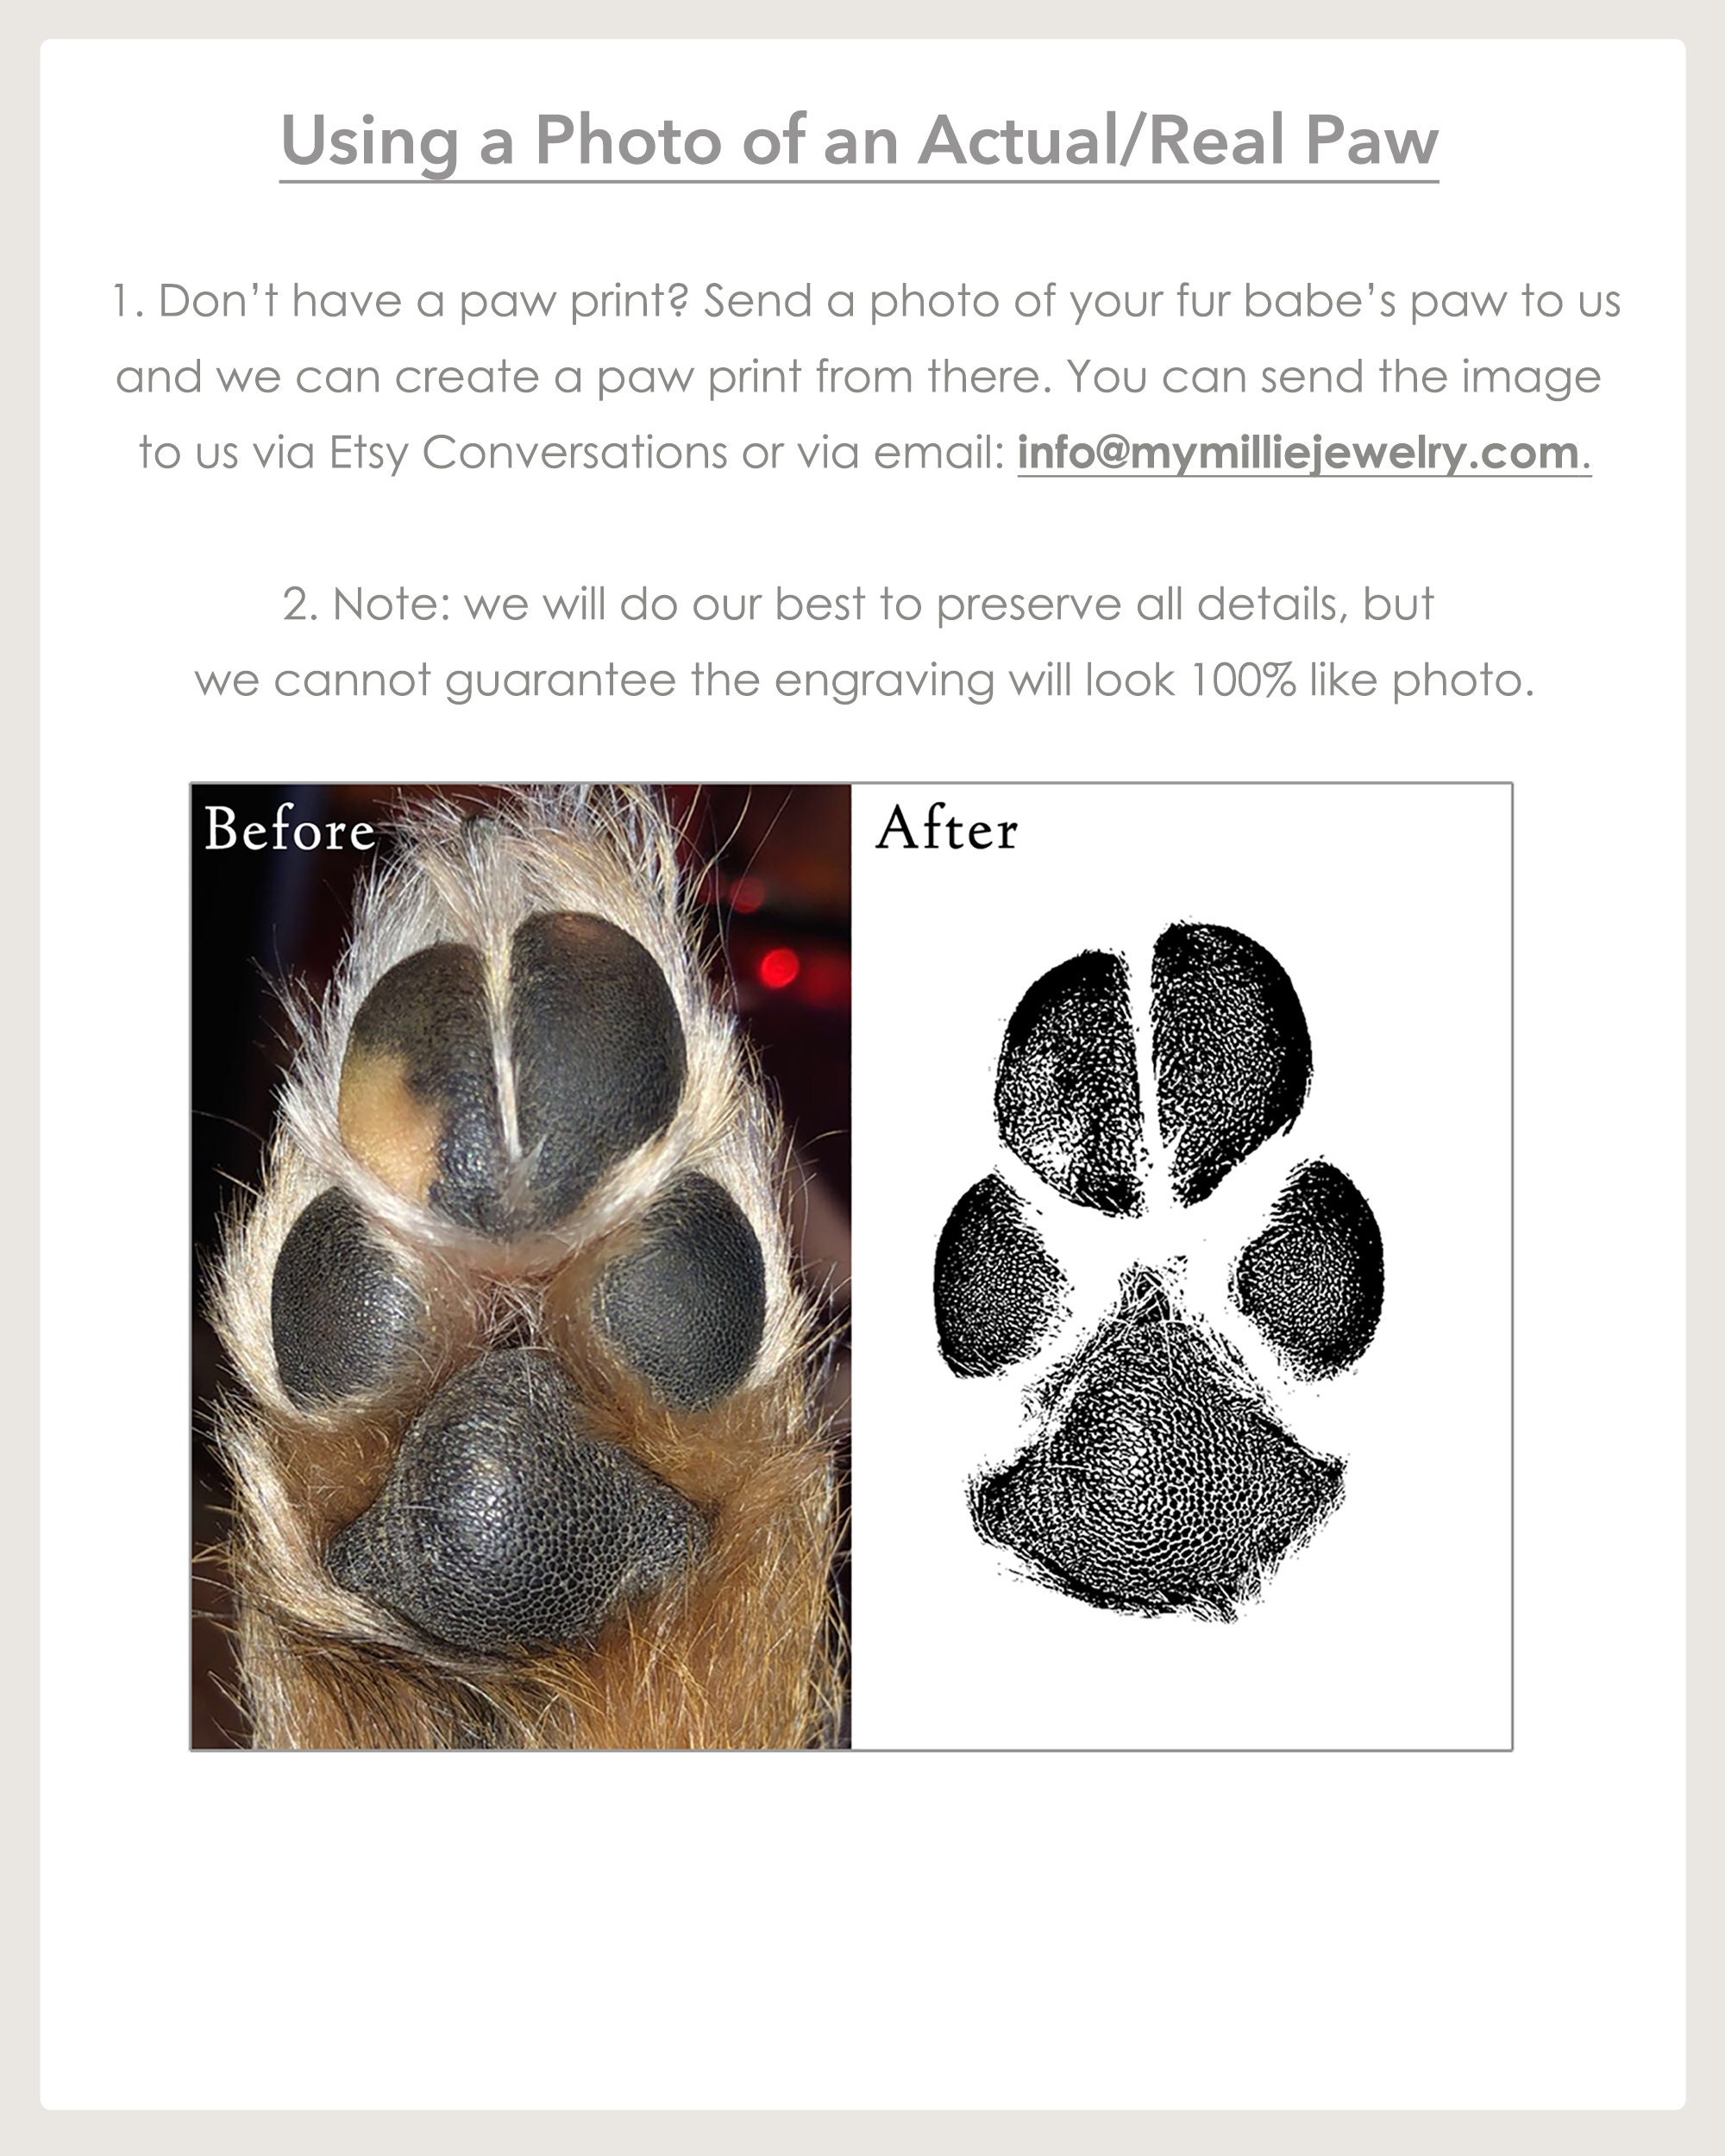 Paw Print Editing Fees for Photos of Actual Paws -  Canada